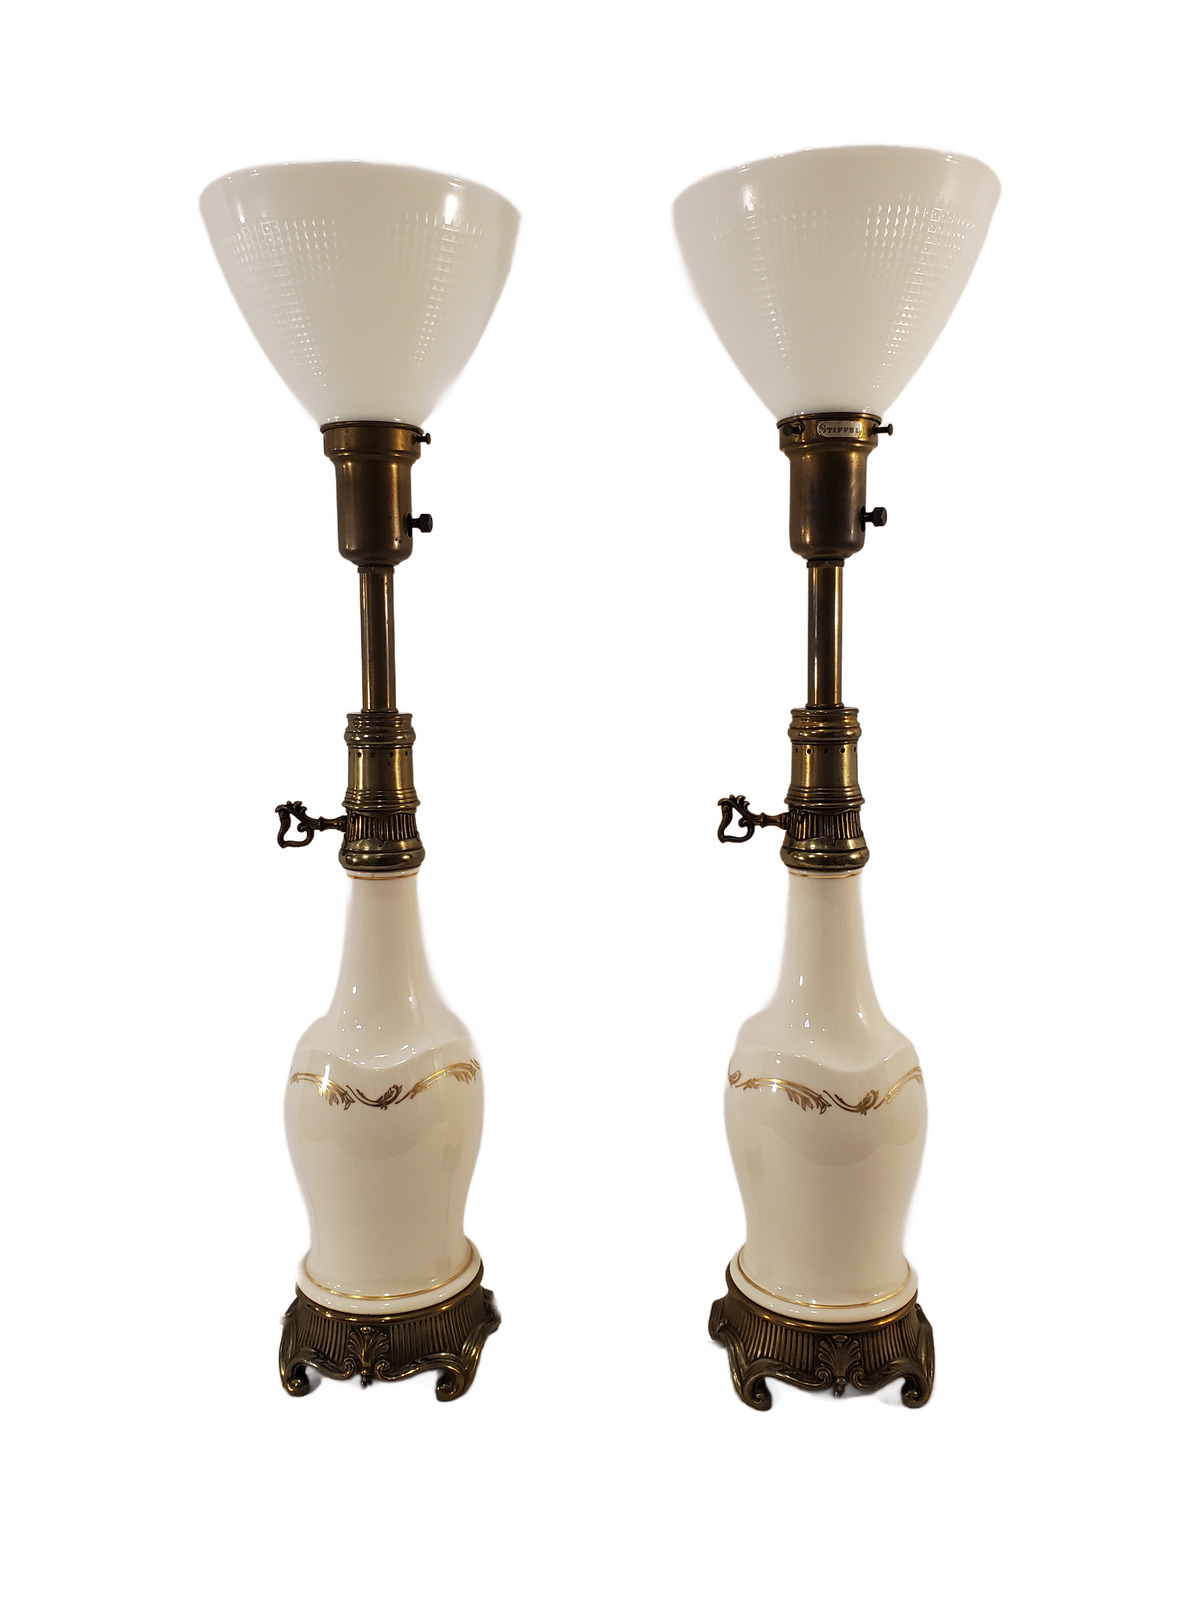 Stiffel Lenox Hollywood Regency Banquet Torchiere Table Lamps